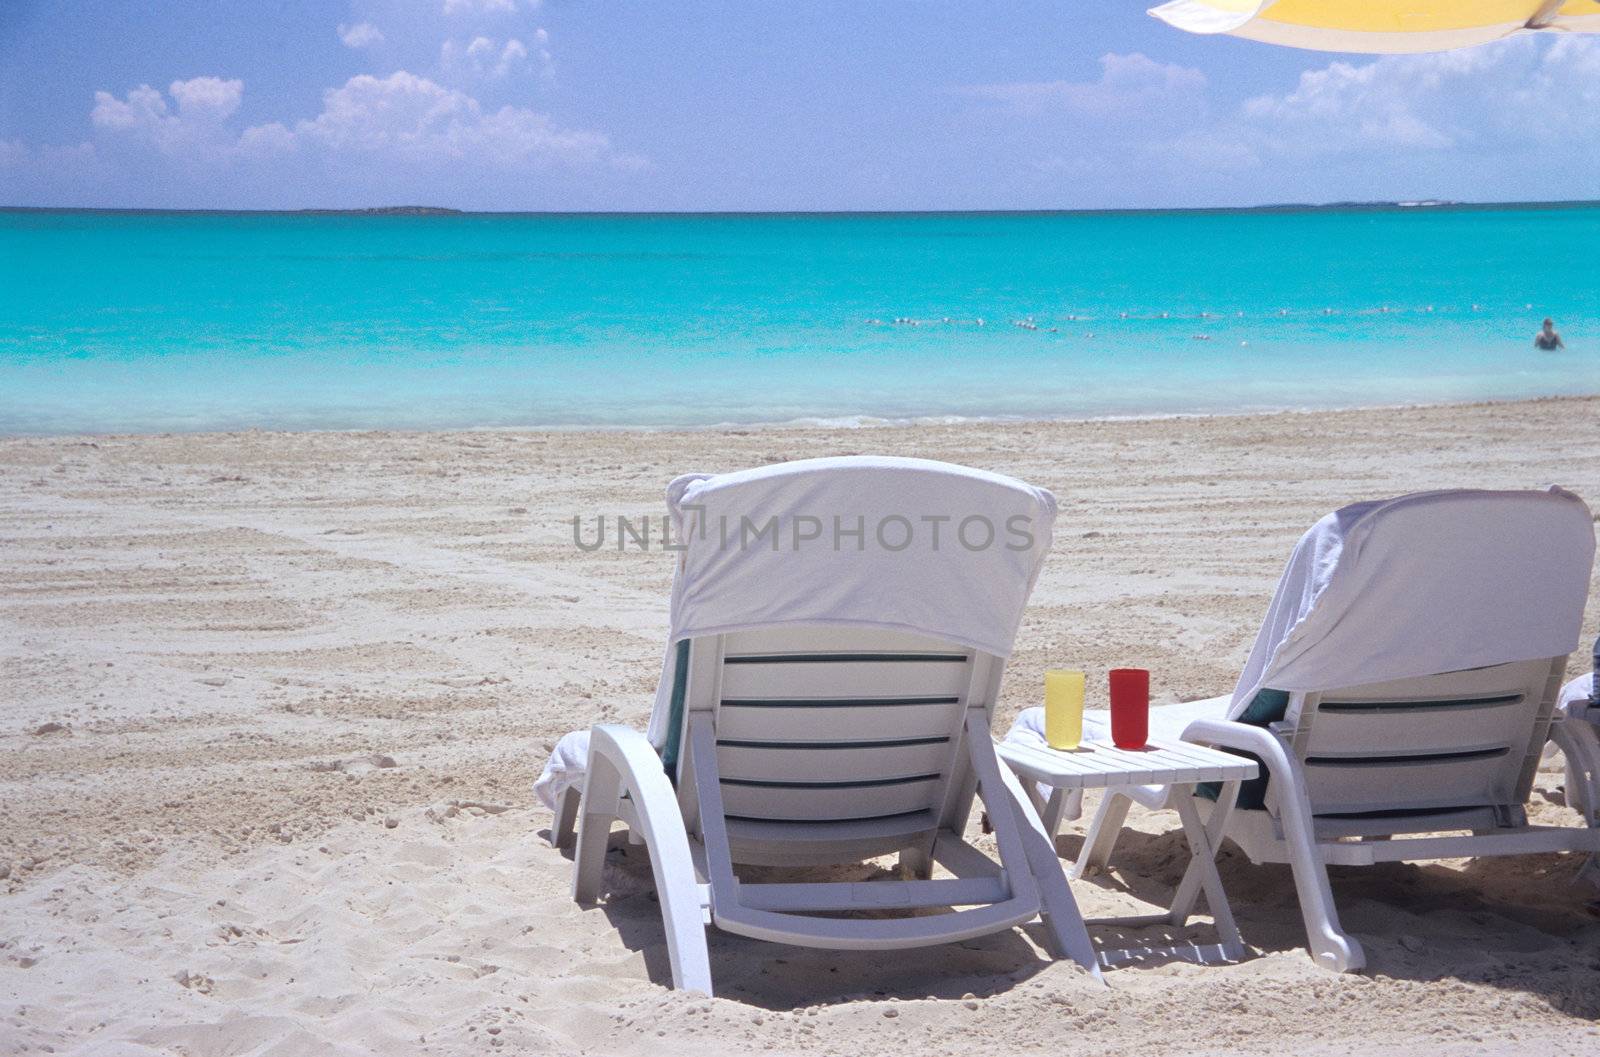 Chairs in the Sand by ACMPhoto